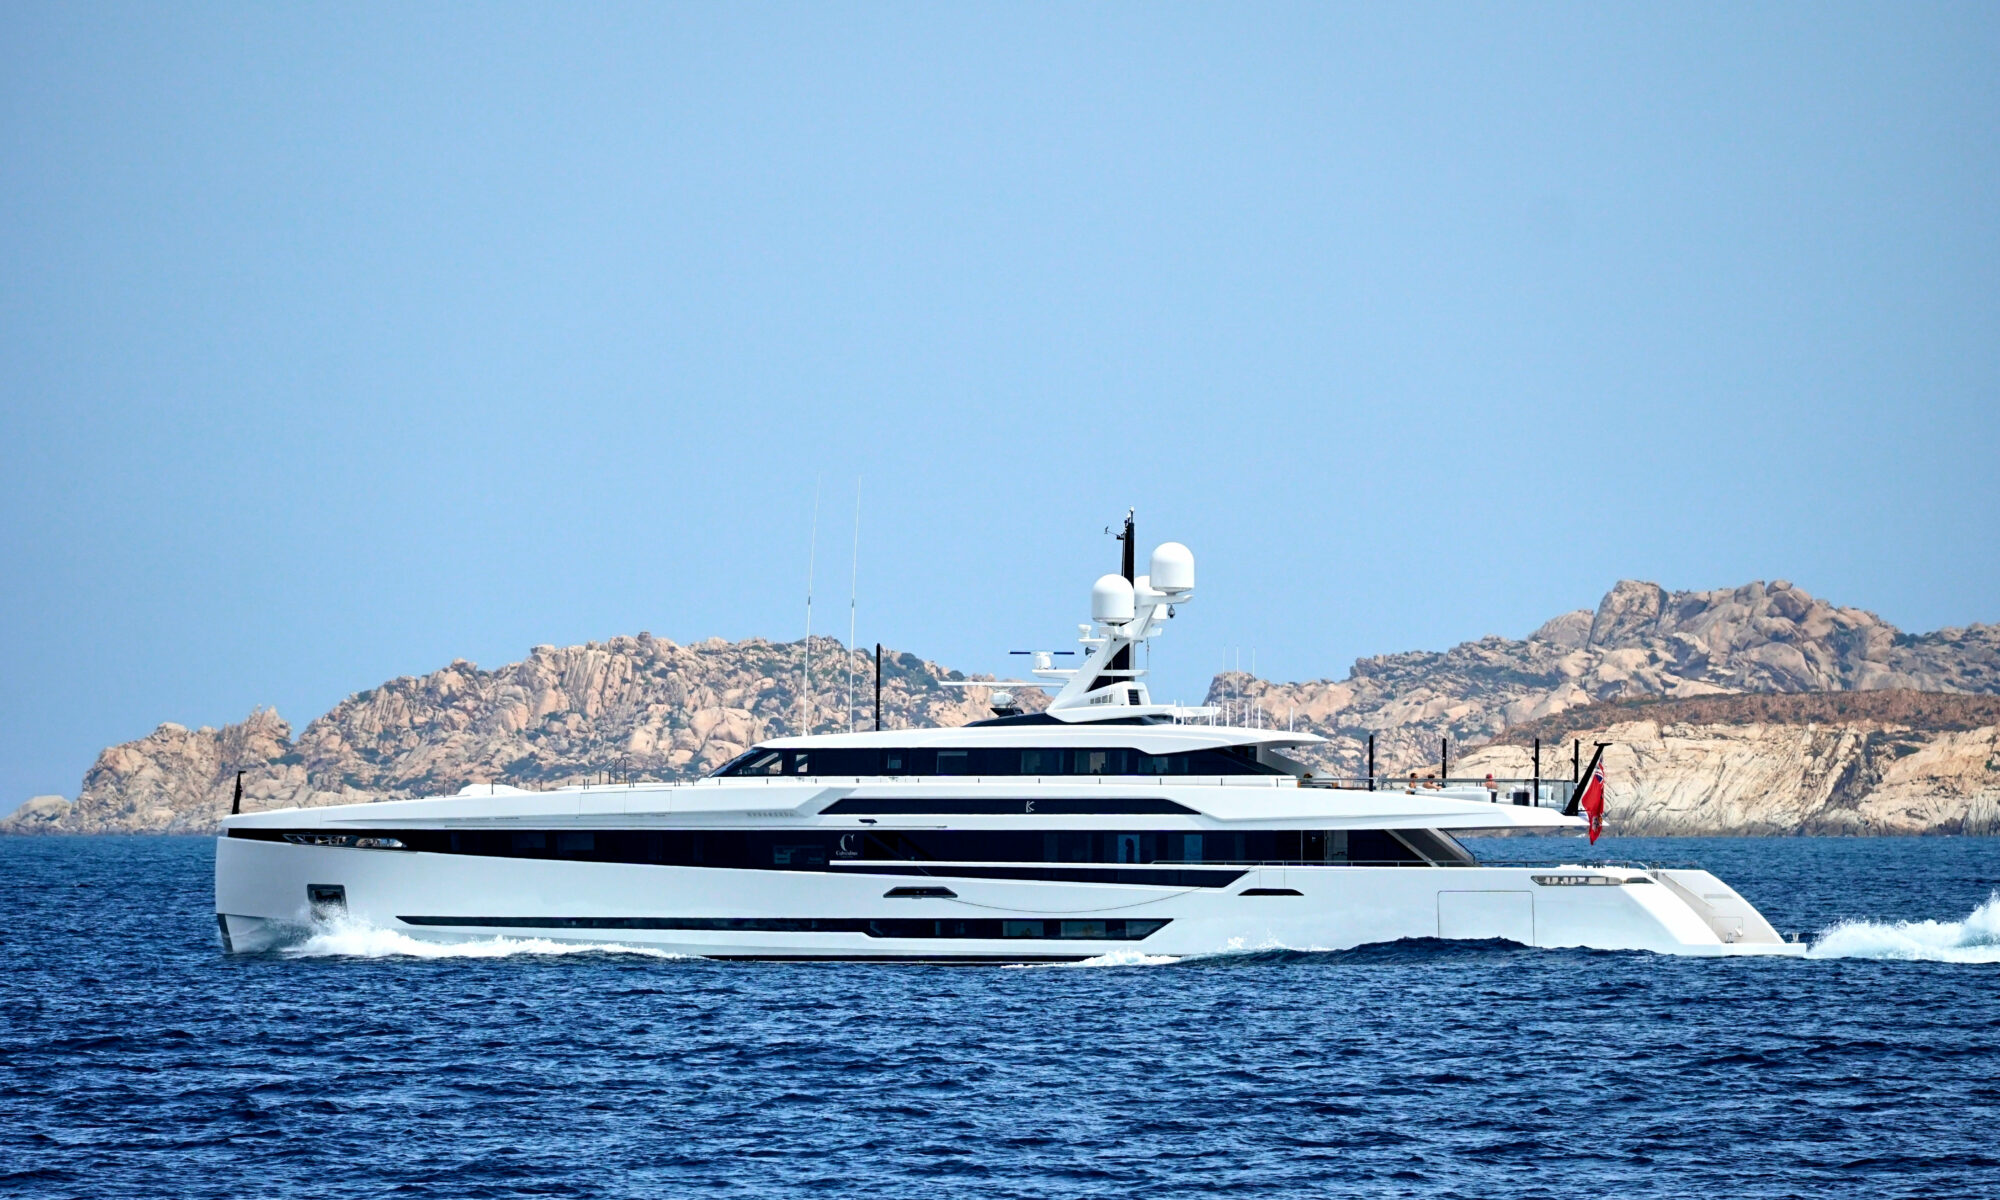 Columbus Yachts, a brand of Palumbo Superyachts, presents the new 50-metre Sport M/Y K2.